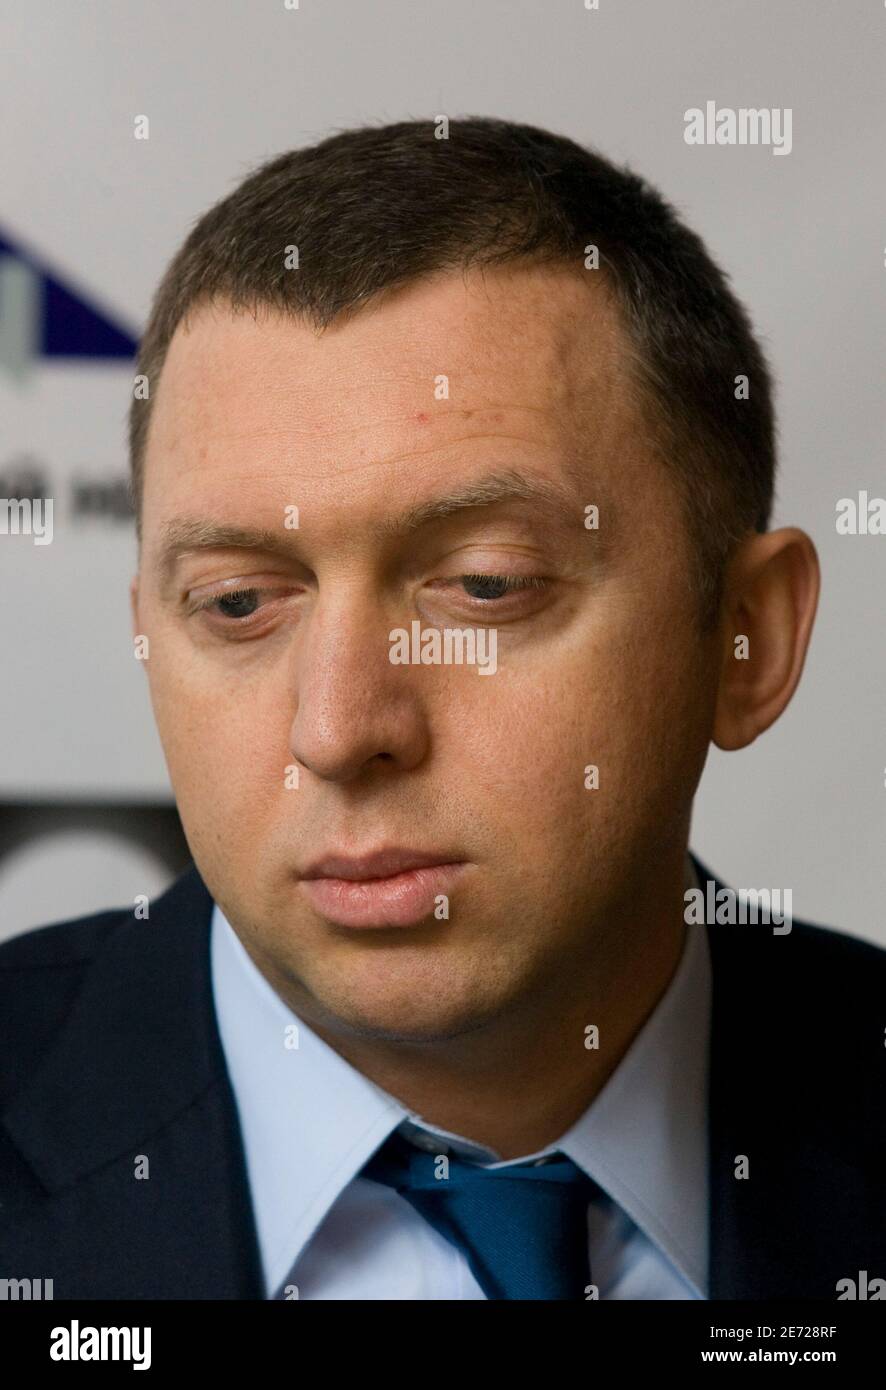 UC RUSAL majority owner Oleg Deripaska attends a news conference in Moscow November 25, 2008. Norilsk Nickel's rival shareholders agreed on Tuesday to resolve a management dispute and postpone any talk of a merger with one-quarter owner United Company RUSAL for three years. Norilsk Chairman Vladimir Potanin said neither he nor Deripaska would stand for election to Norilsk's board at an extraordinary meeting scheduled for Dec. 26. REUTERS/Sergei Karpukhin (RUSSIA) Stock Photo